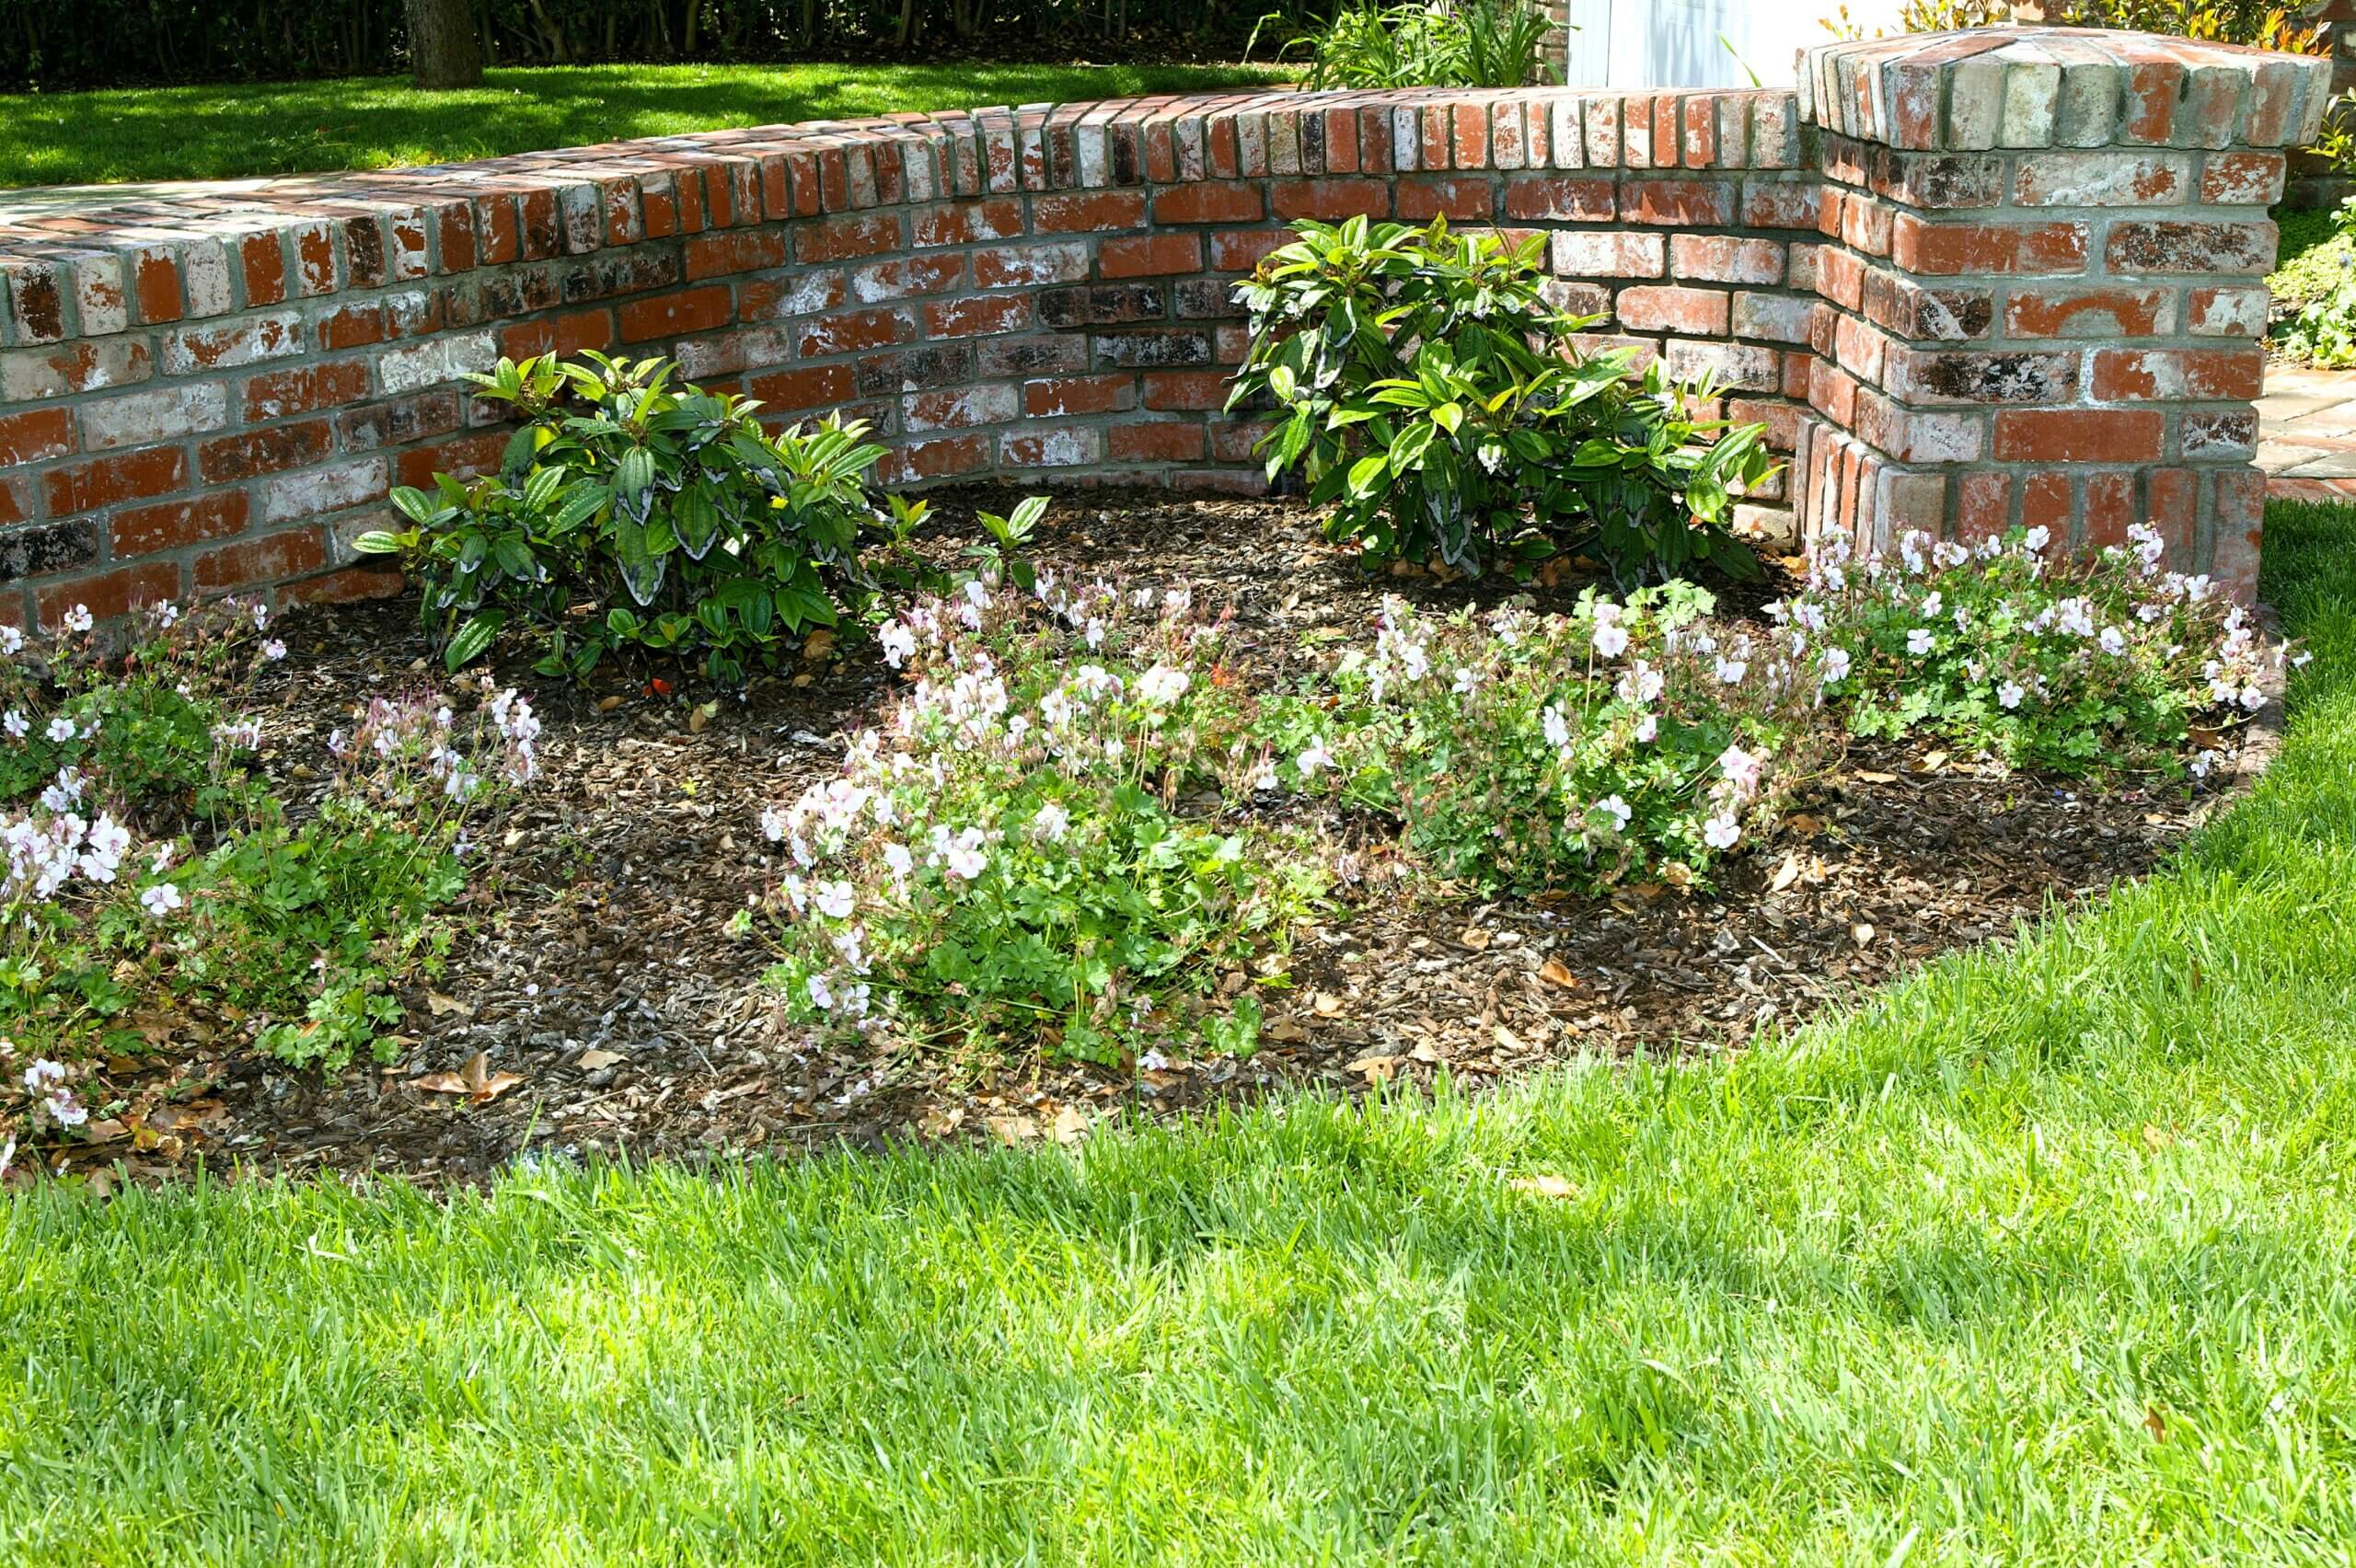 Landscaped brick half wall with curve and plantings